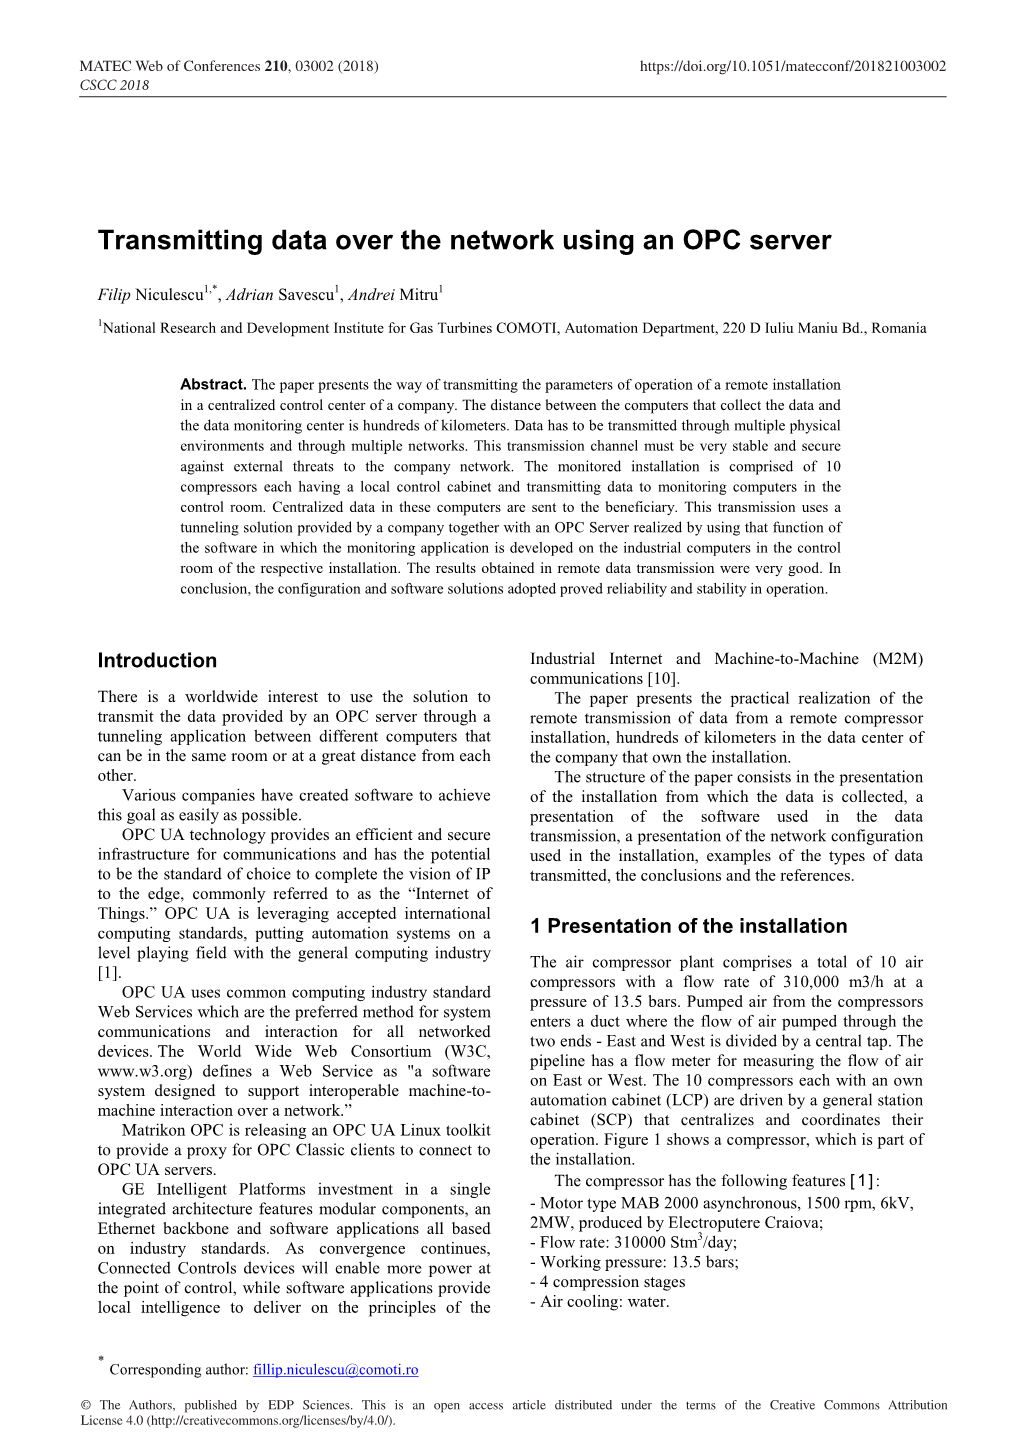 Transmitting Data Over the Network Using an OPC Server